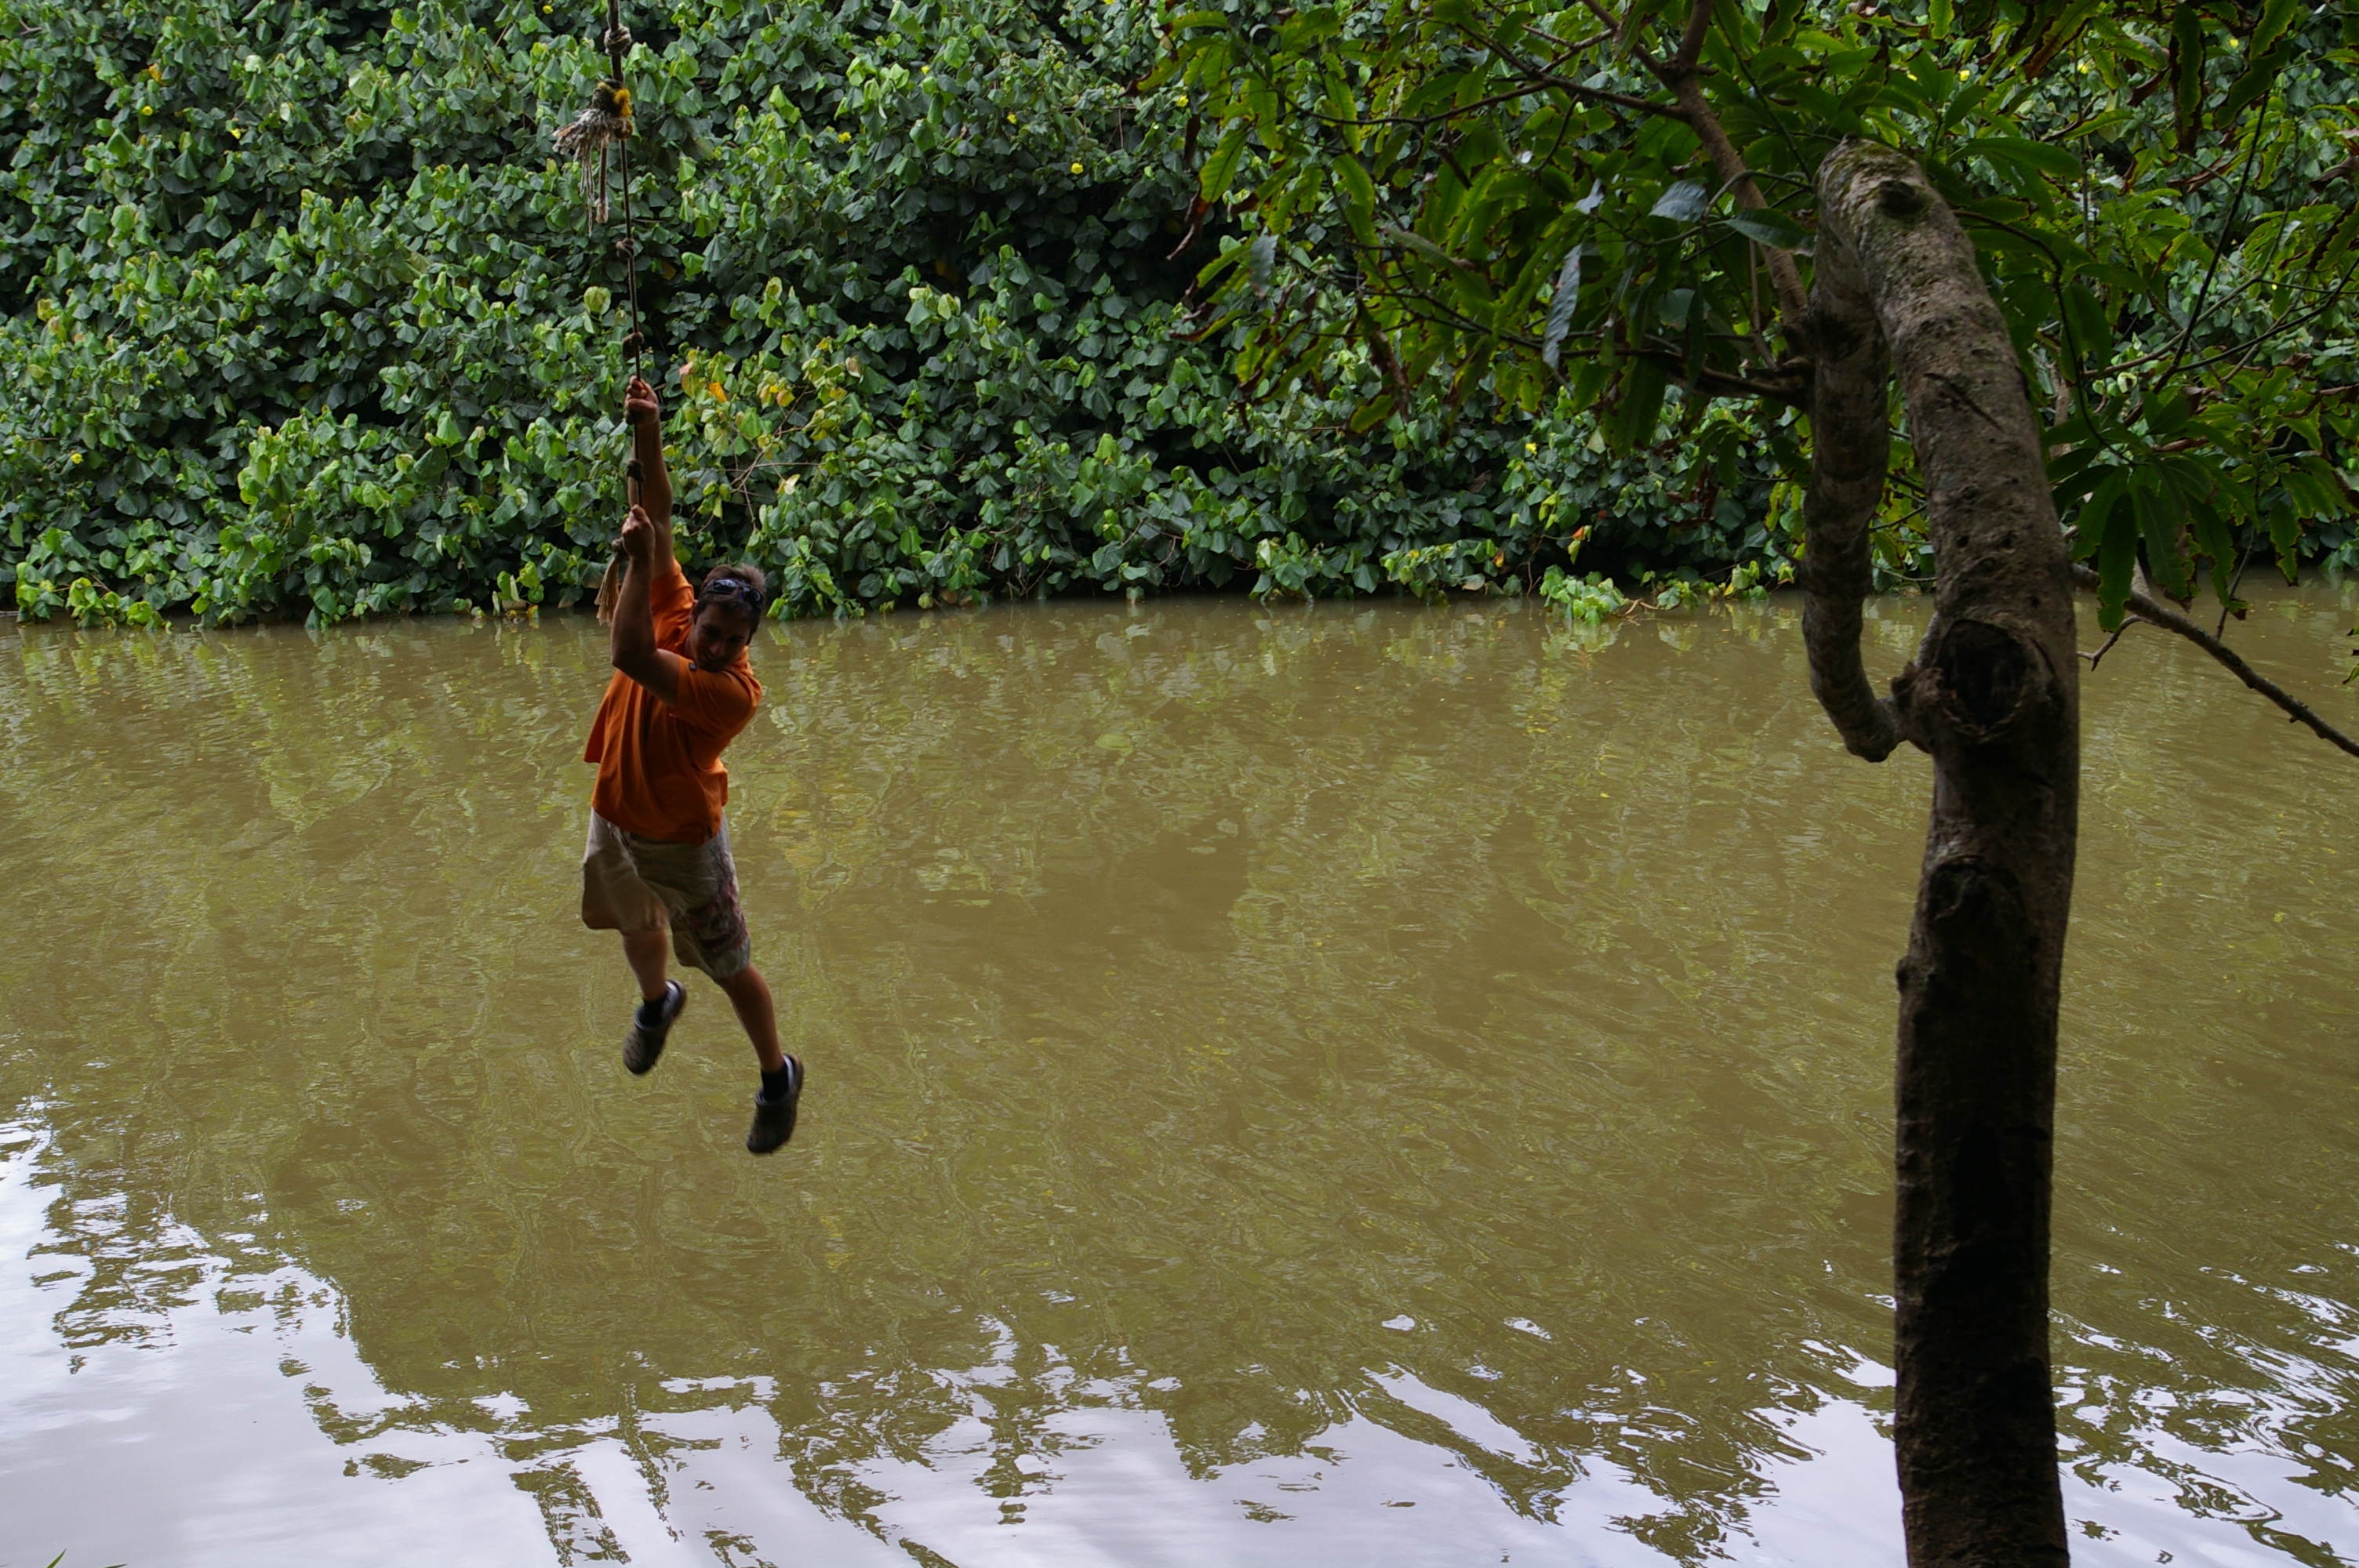 James showing off the rope swing